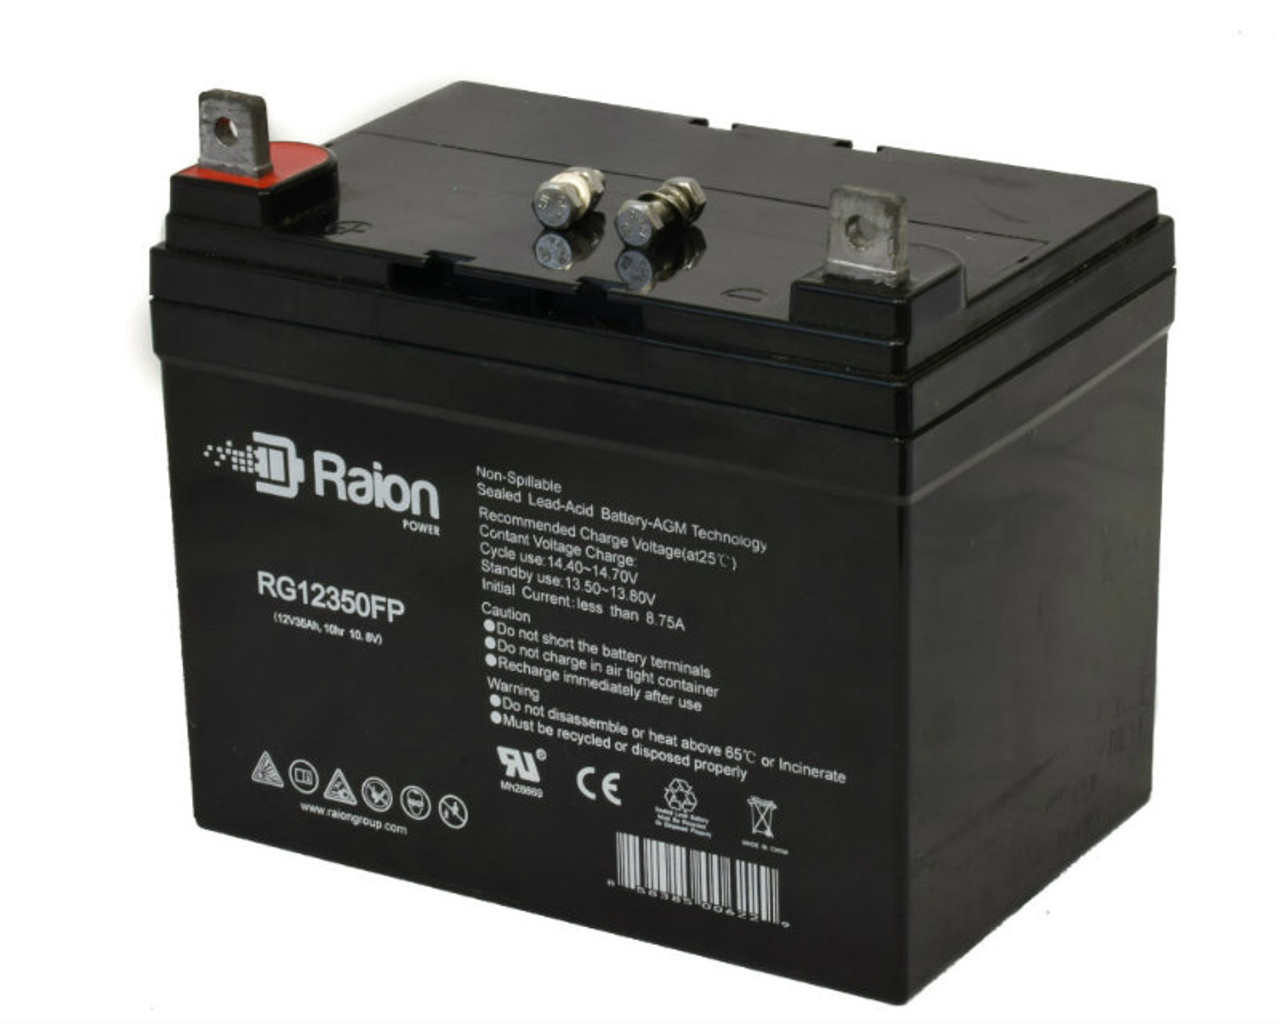 Raion Power Replacement 12V 35Ah Battery for Troy-Bilt 21AE682L063 - 1 Pack